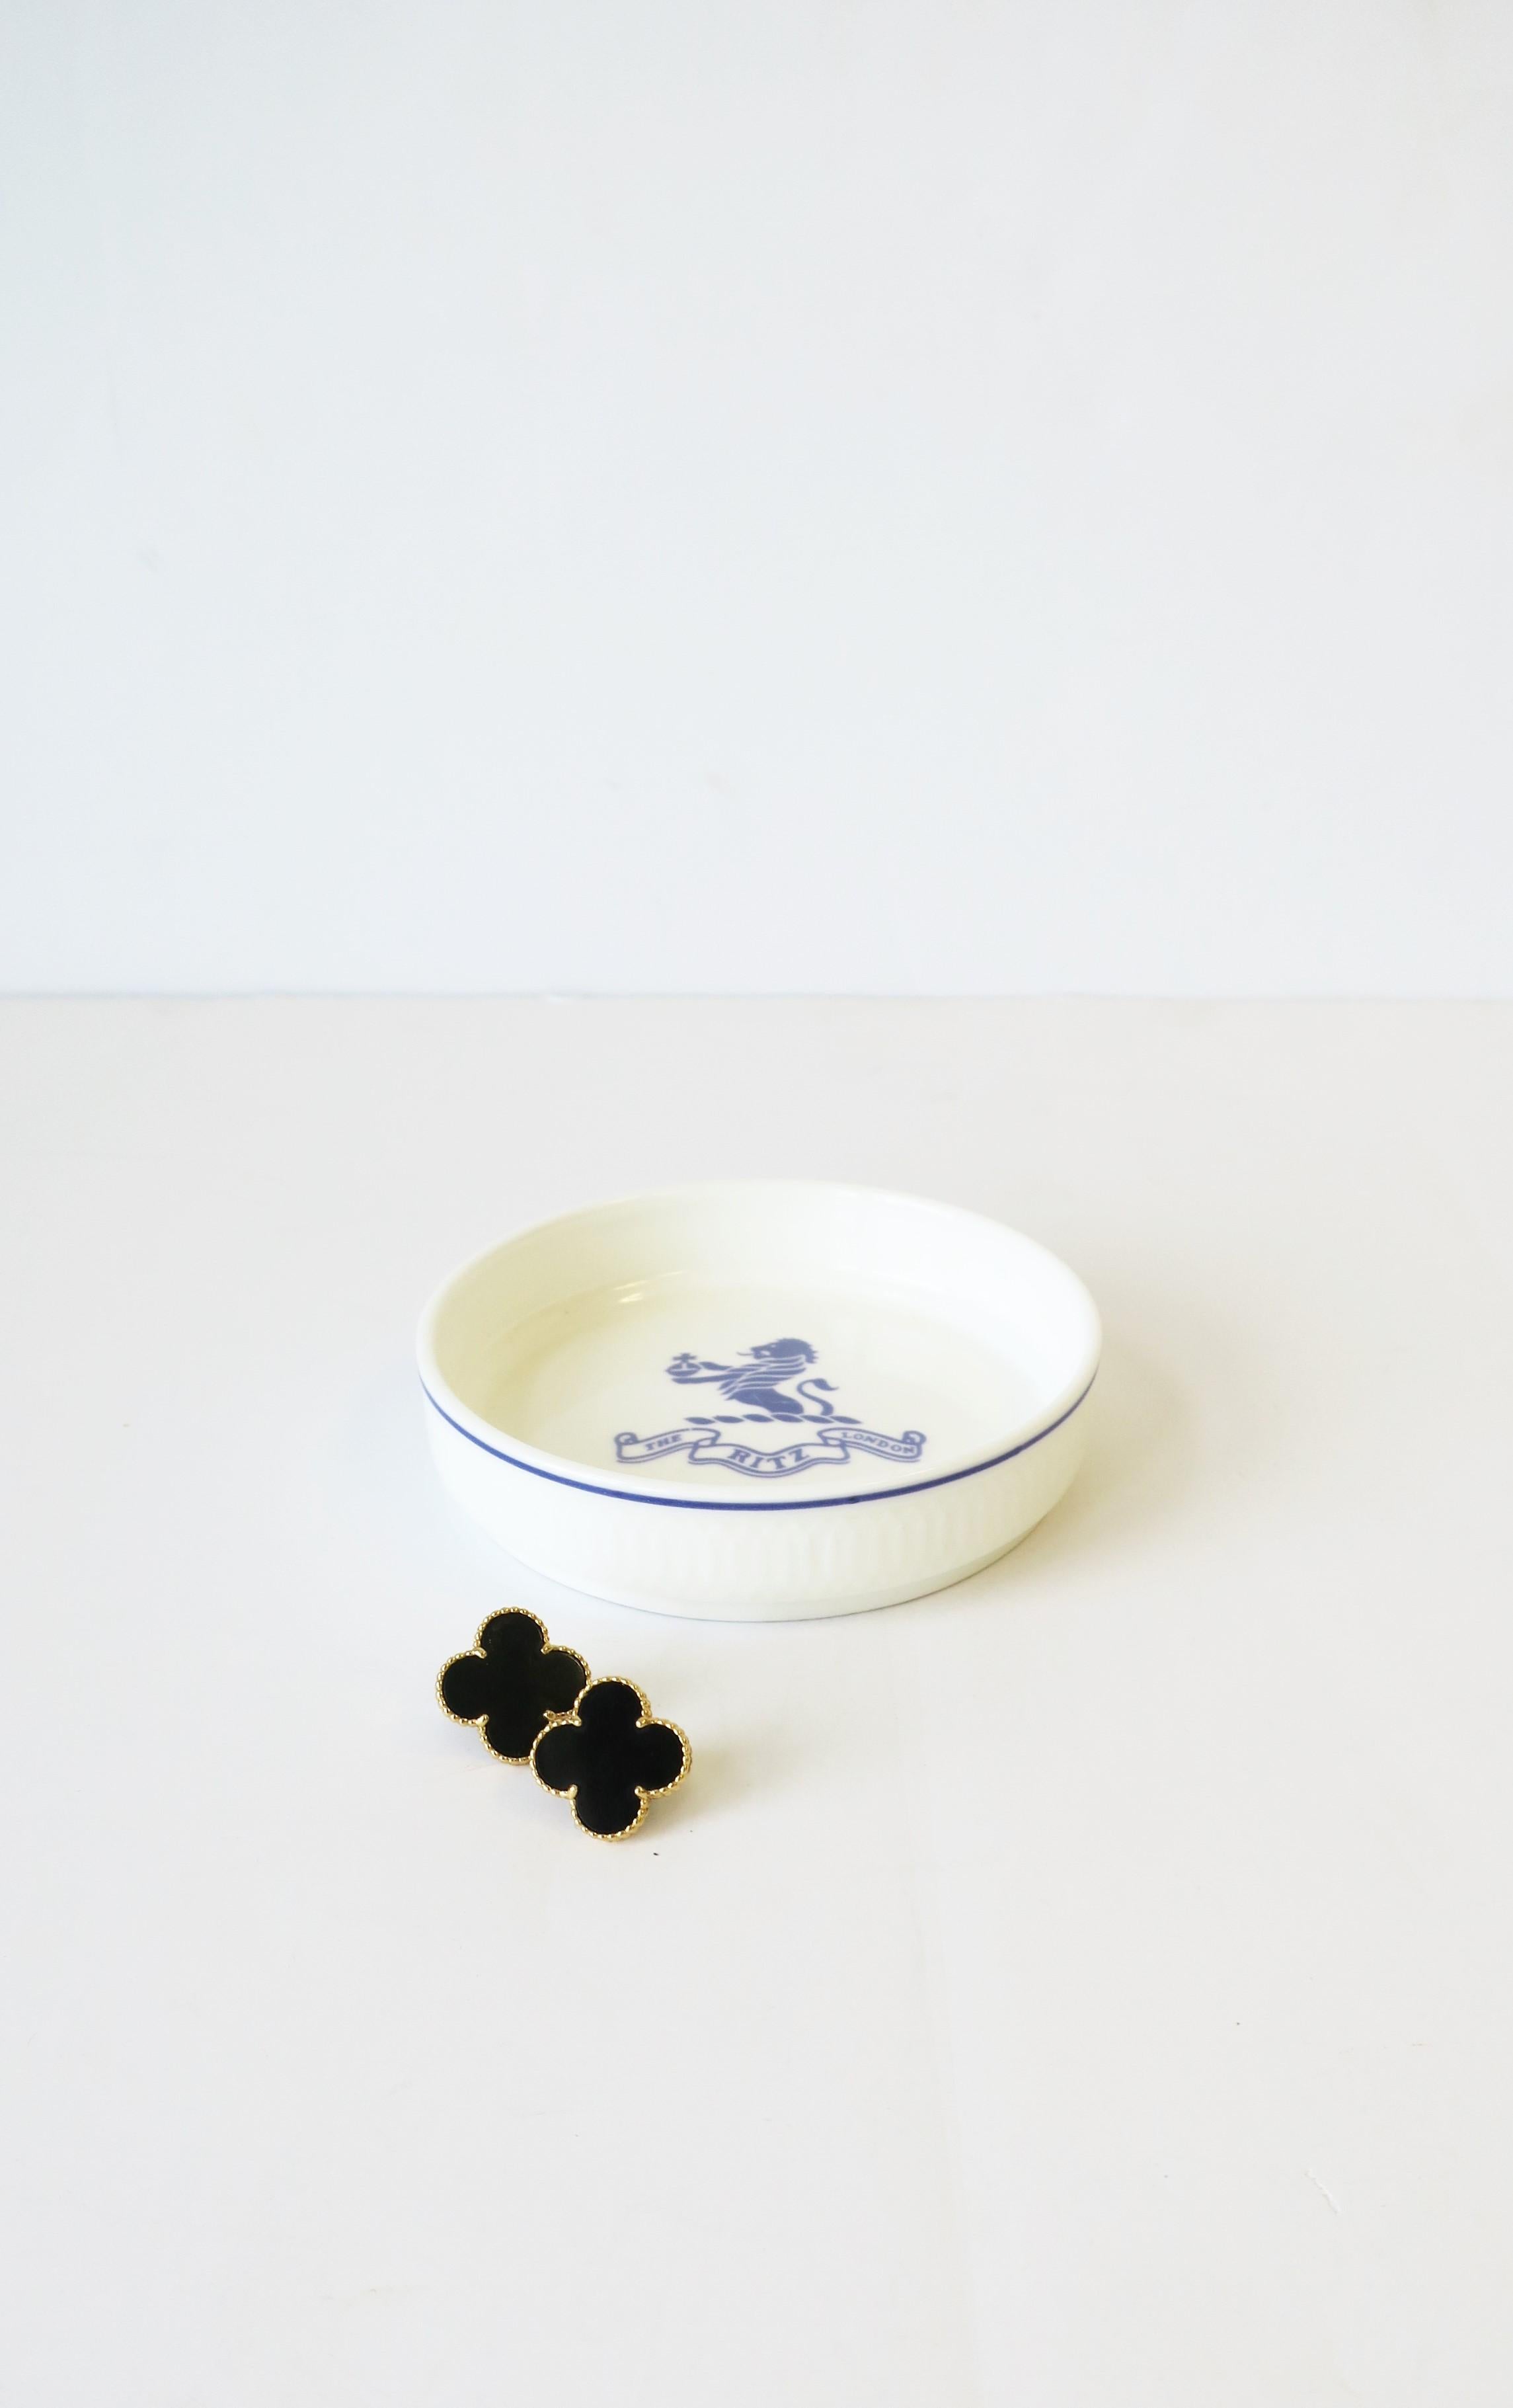 20th Century The Ritz Hotel London Blue and White Porcelain Jewelry Dish by Royal Doulton